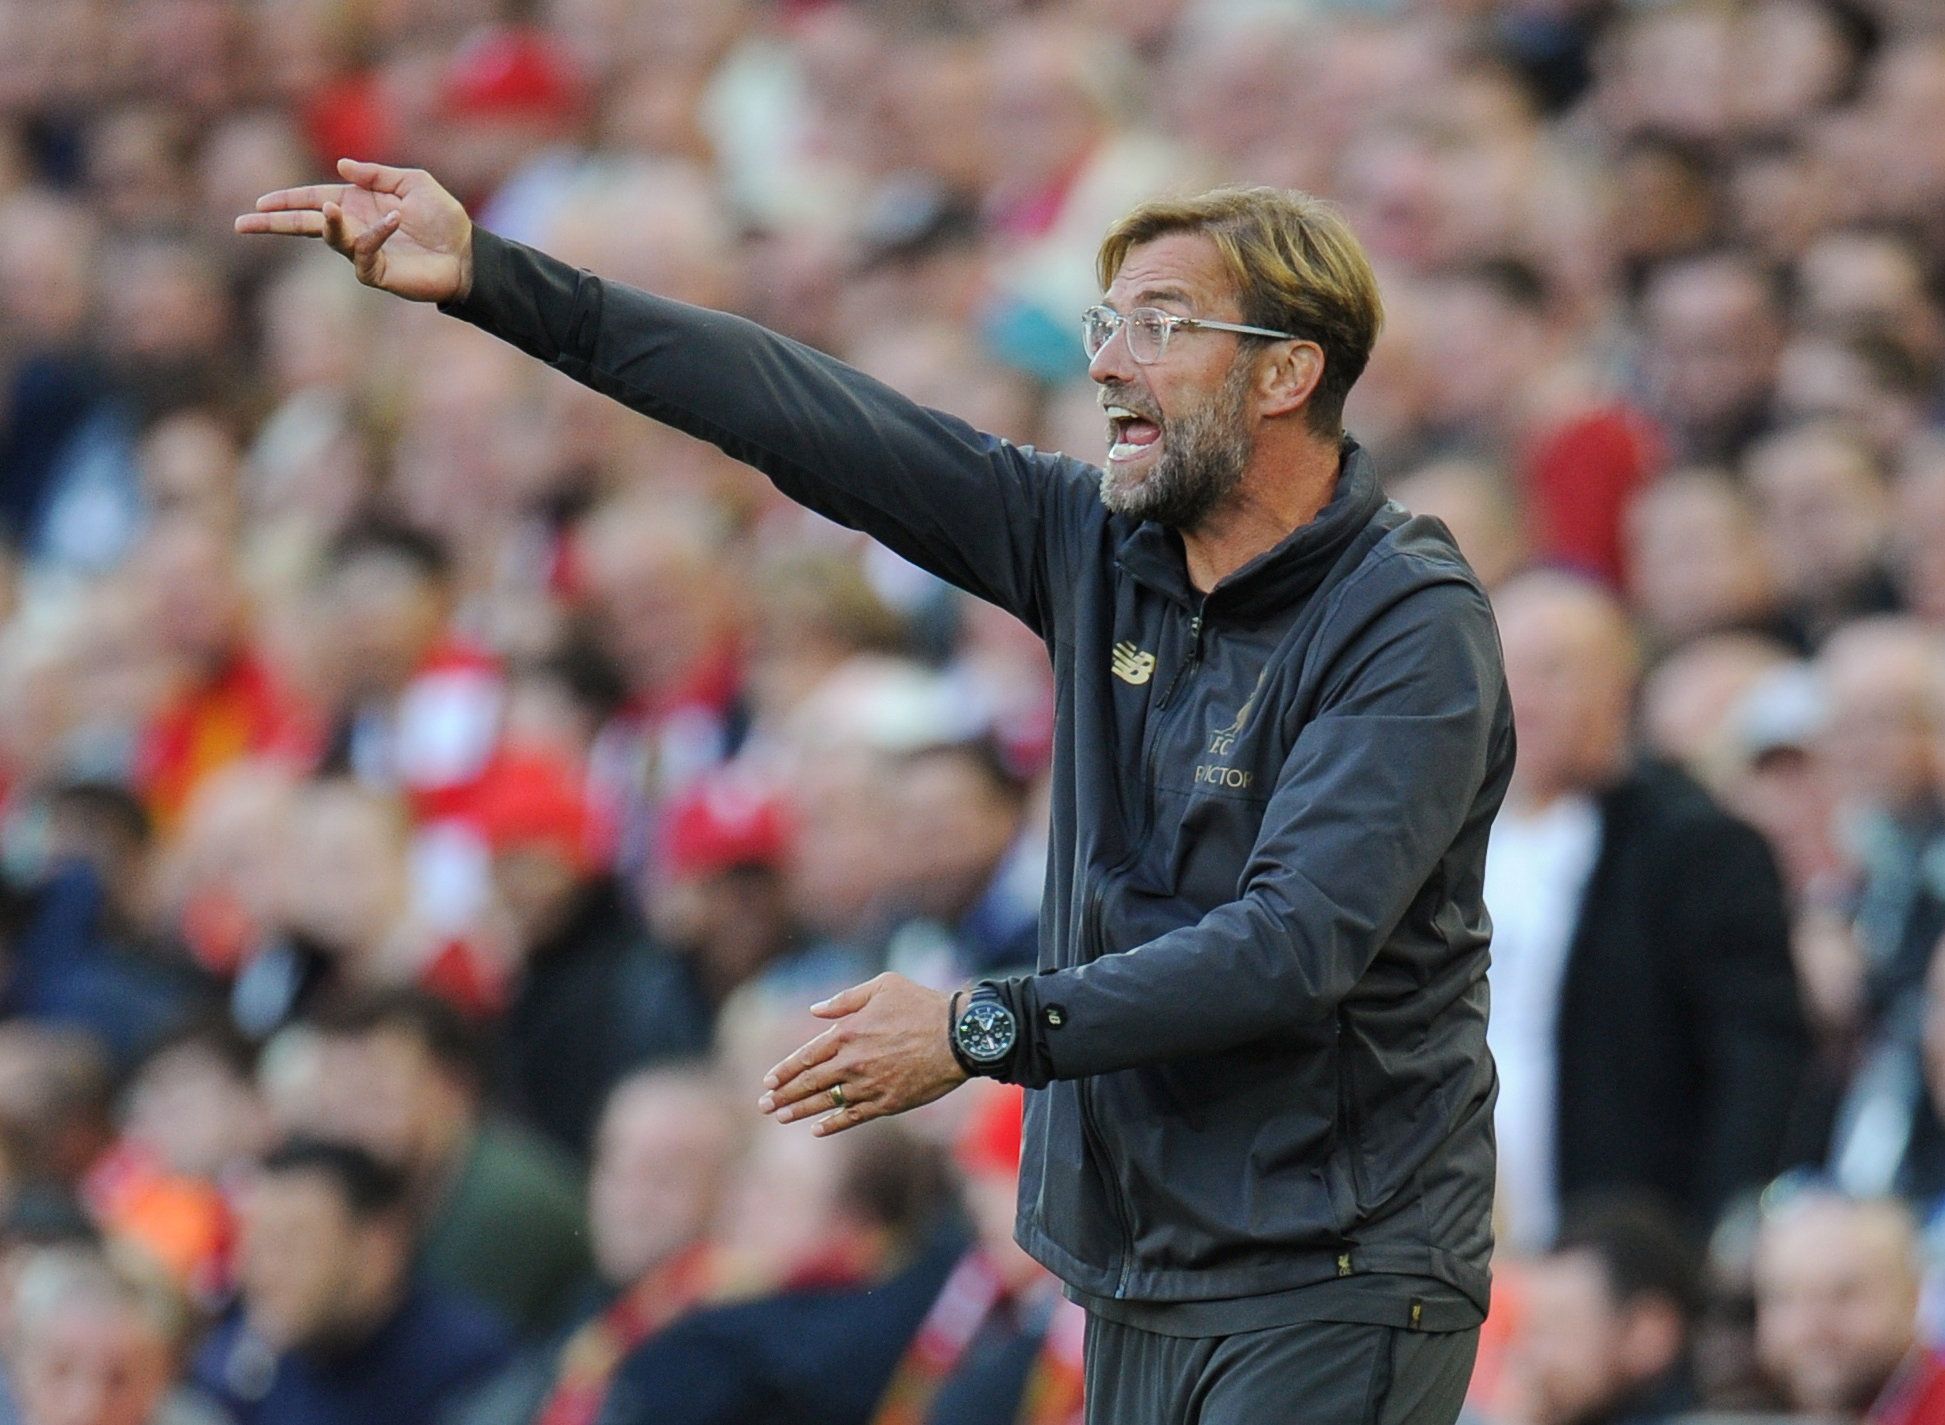 Soccer Football - Premier League - Liverpool v Brighton &amp; Hove Albion - Anfield, Liverpool, Britain - August 25, 2018  Liverpool manager Juergen Klopp gestures during the match   REUTERS/Peter Powell  EDITORIAL USE ONLY. No use with unauthorized audio, video, data, fixture lists, club/league logos or 